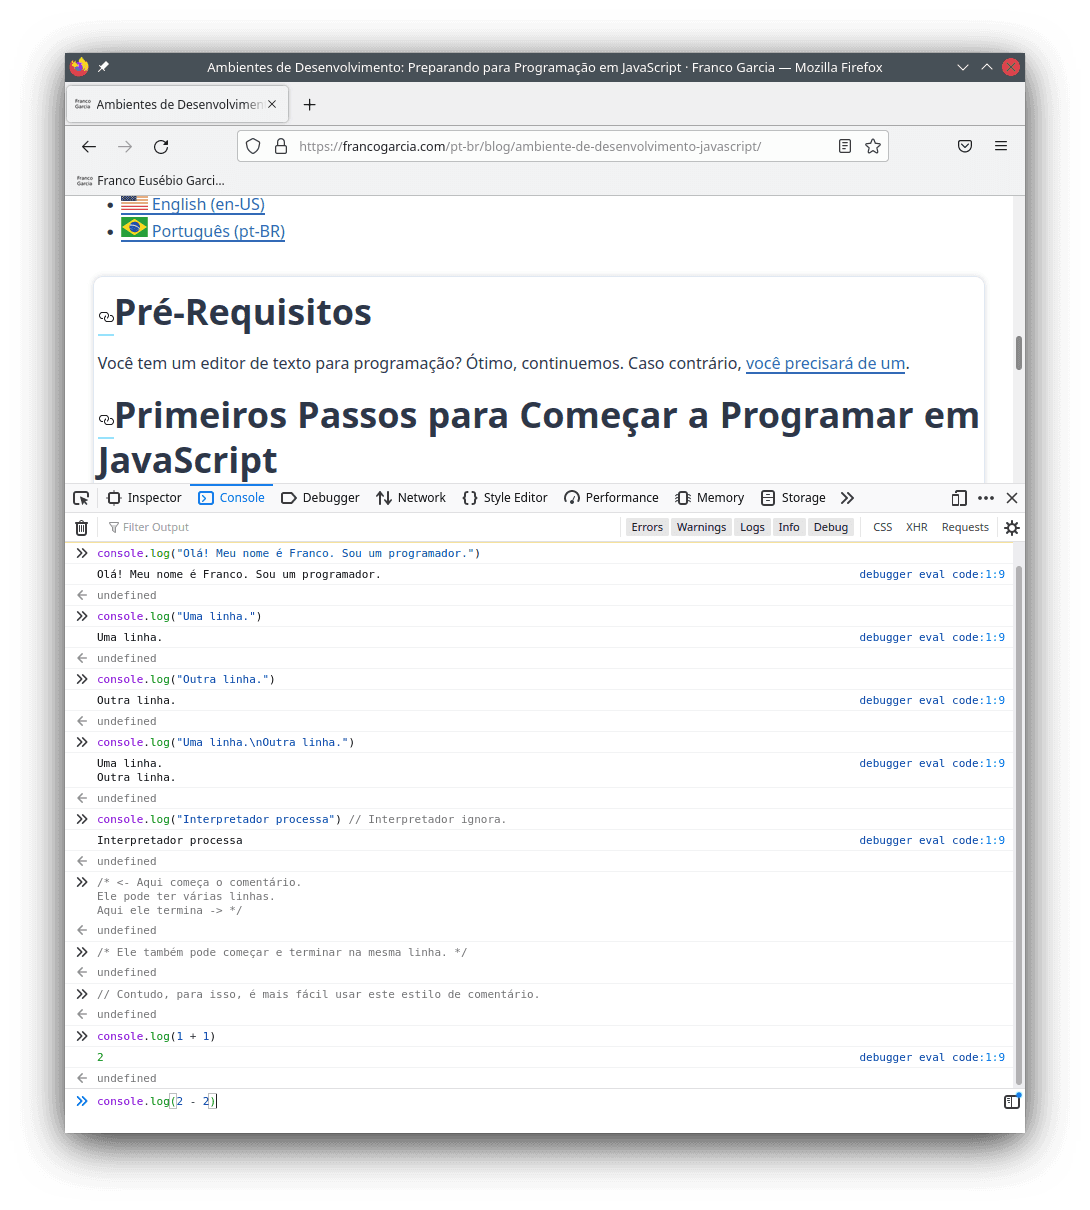 Examples of results from evaluating some of the source code blocks provided in the Portuguese version of this subsection.